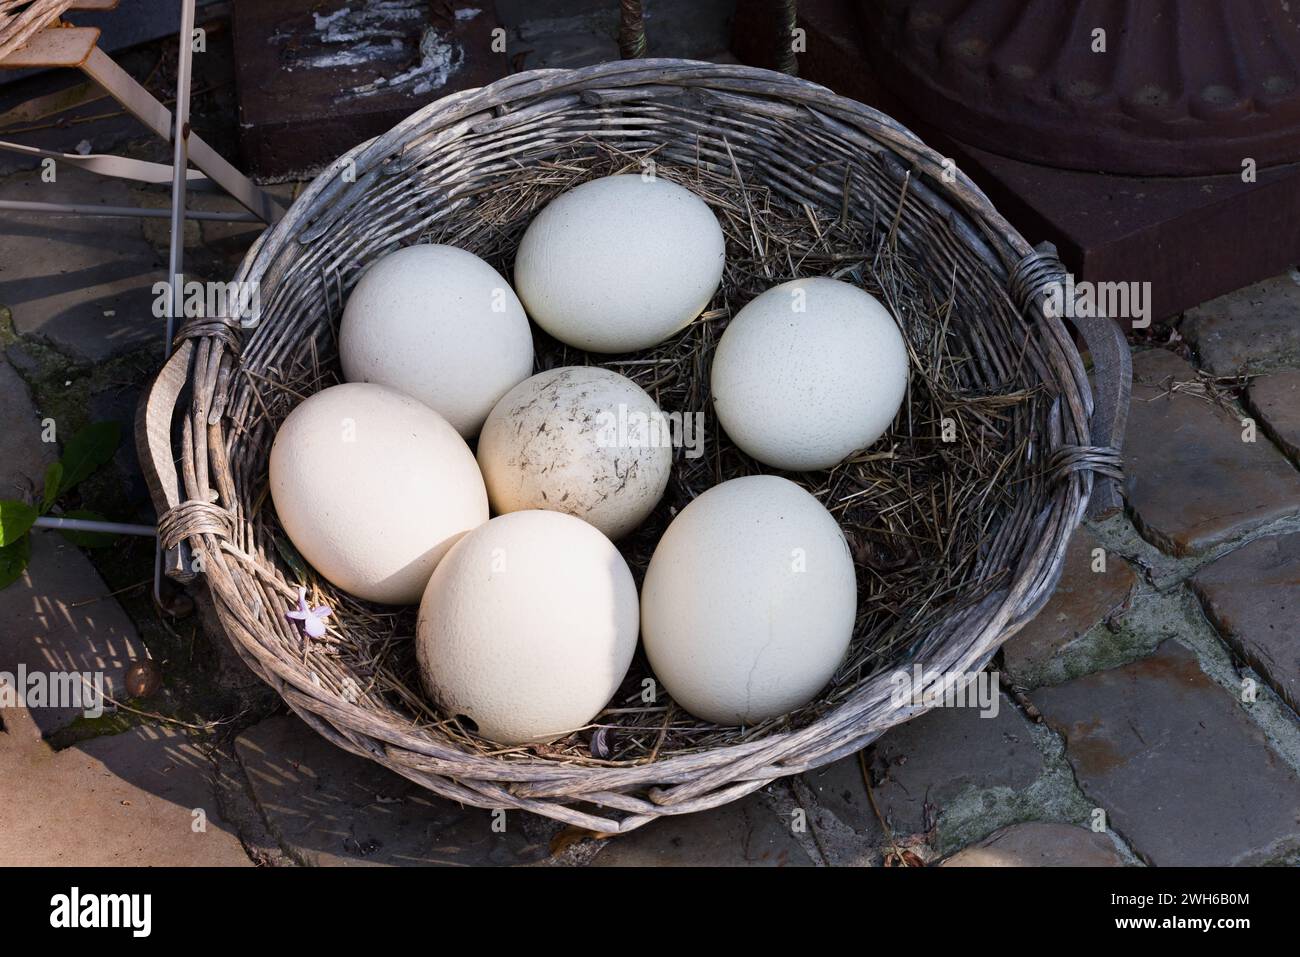 Group of seven fresh ostrich eggs put in a vintage wicker basket Stock Photo